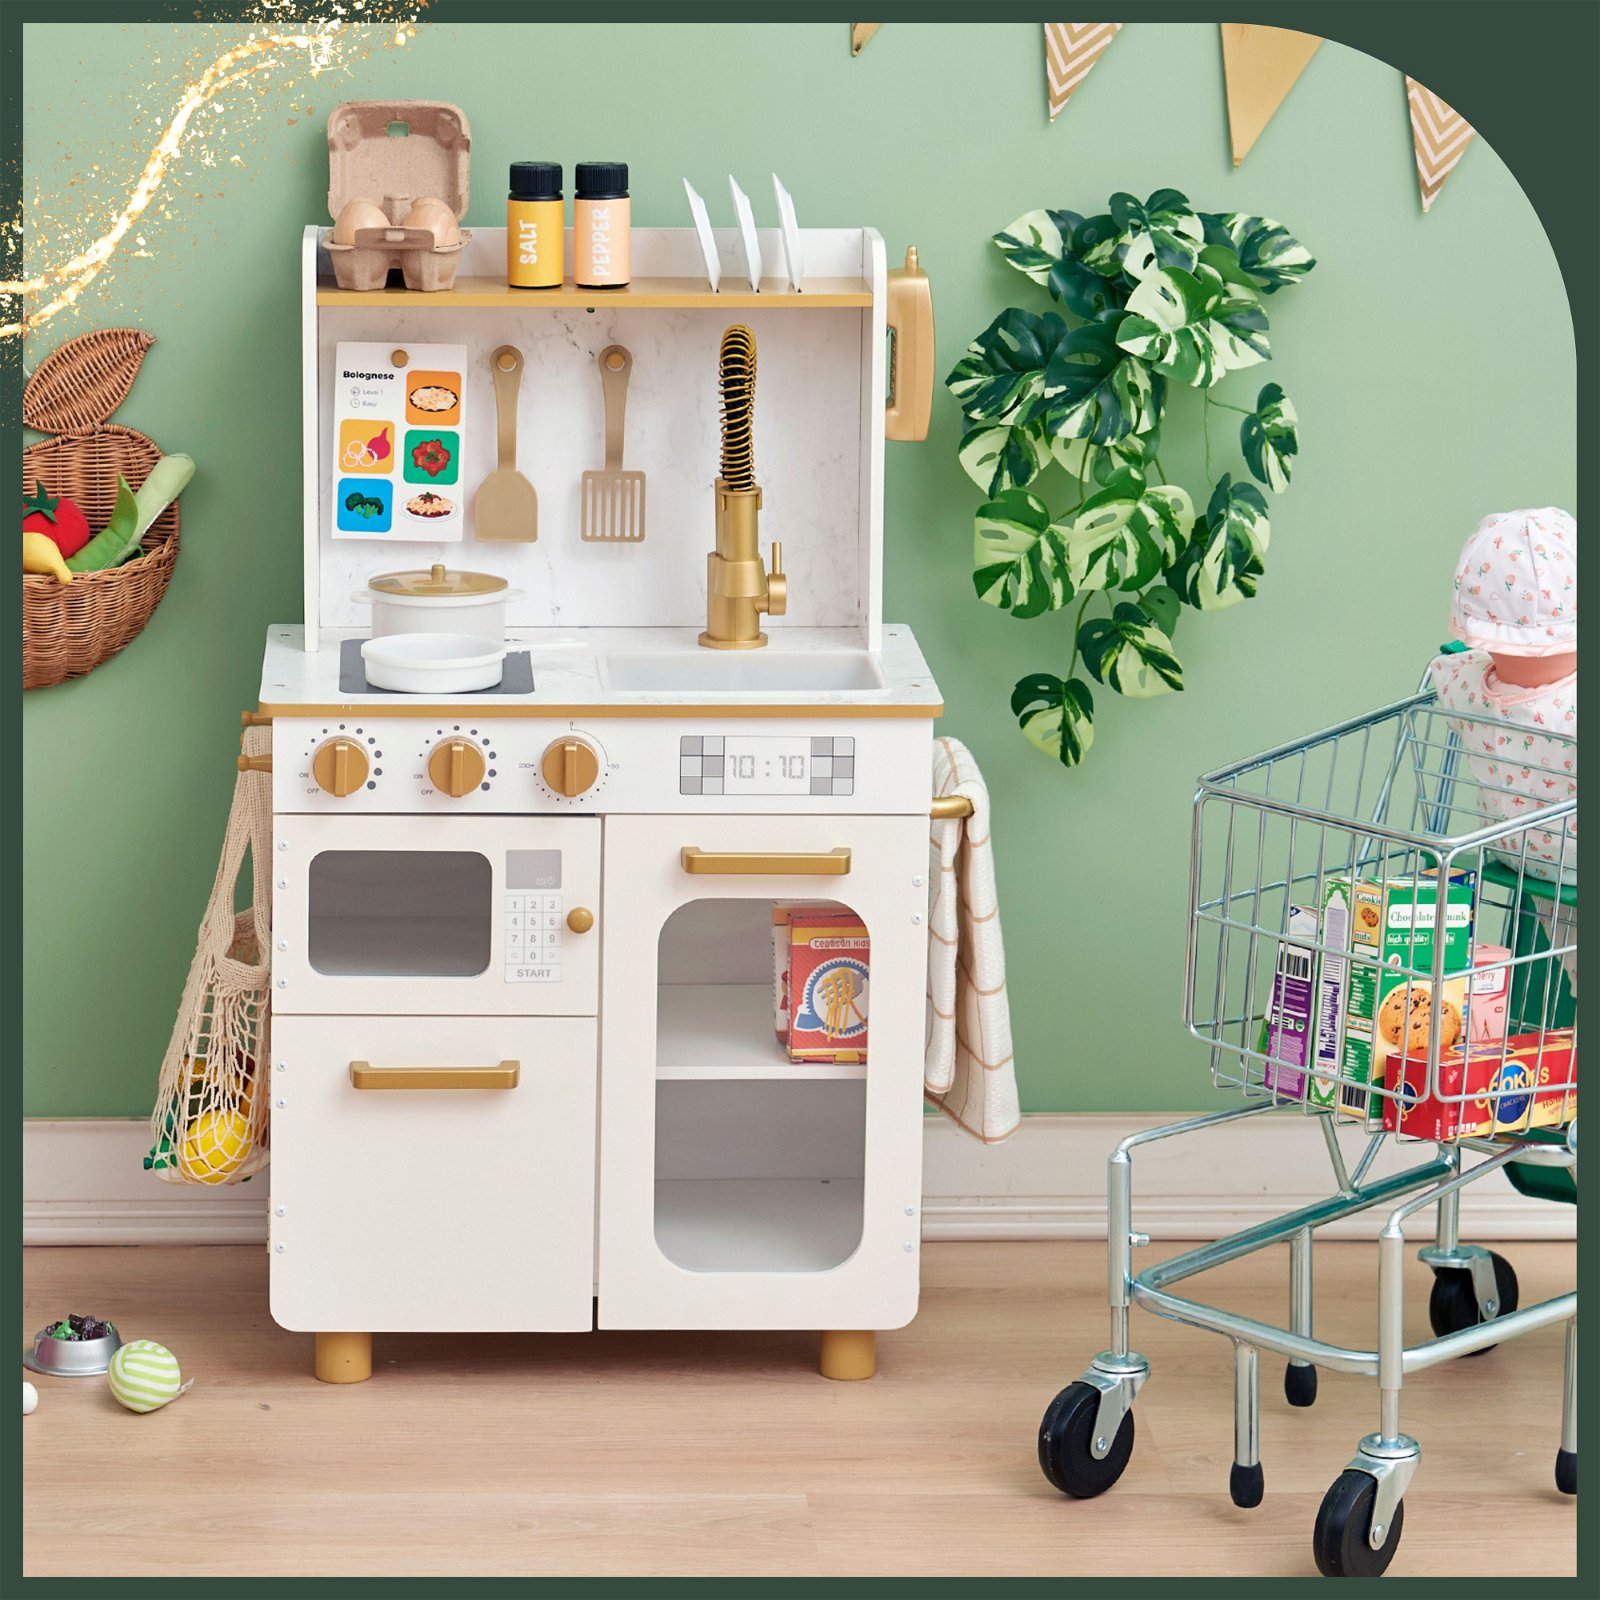 MEMPHIS COMPACT PLAY KITCHEN